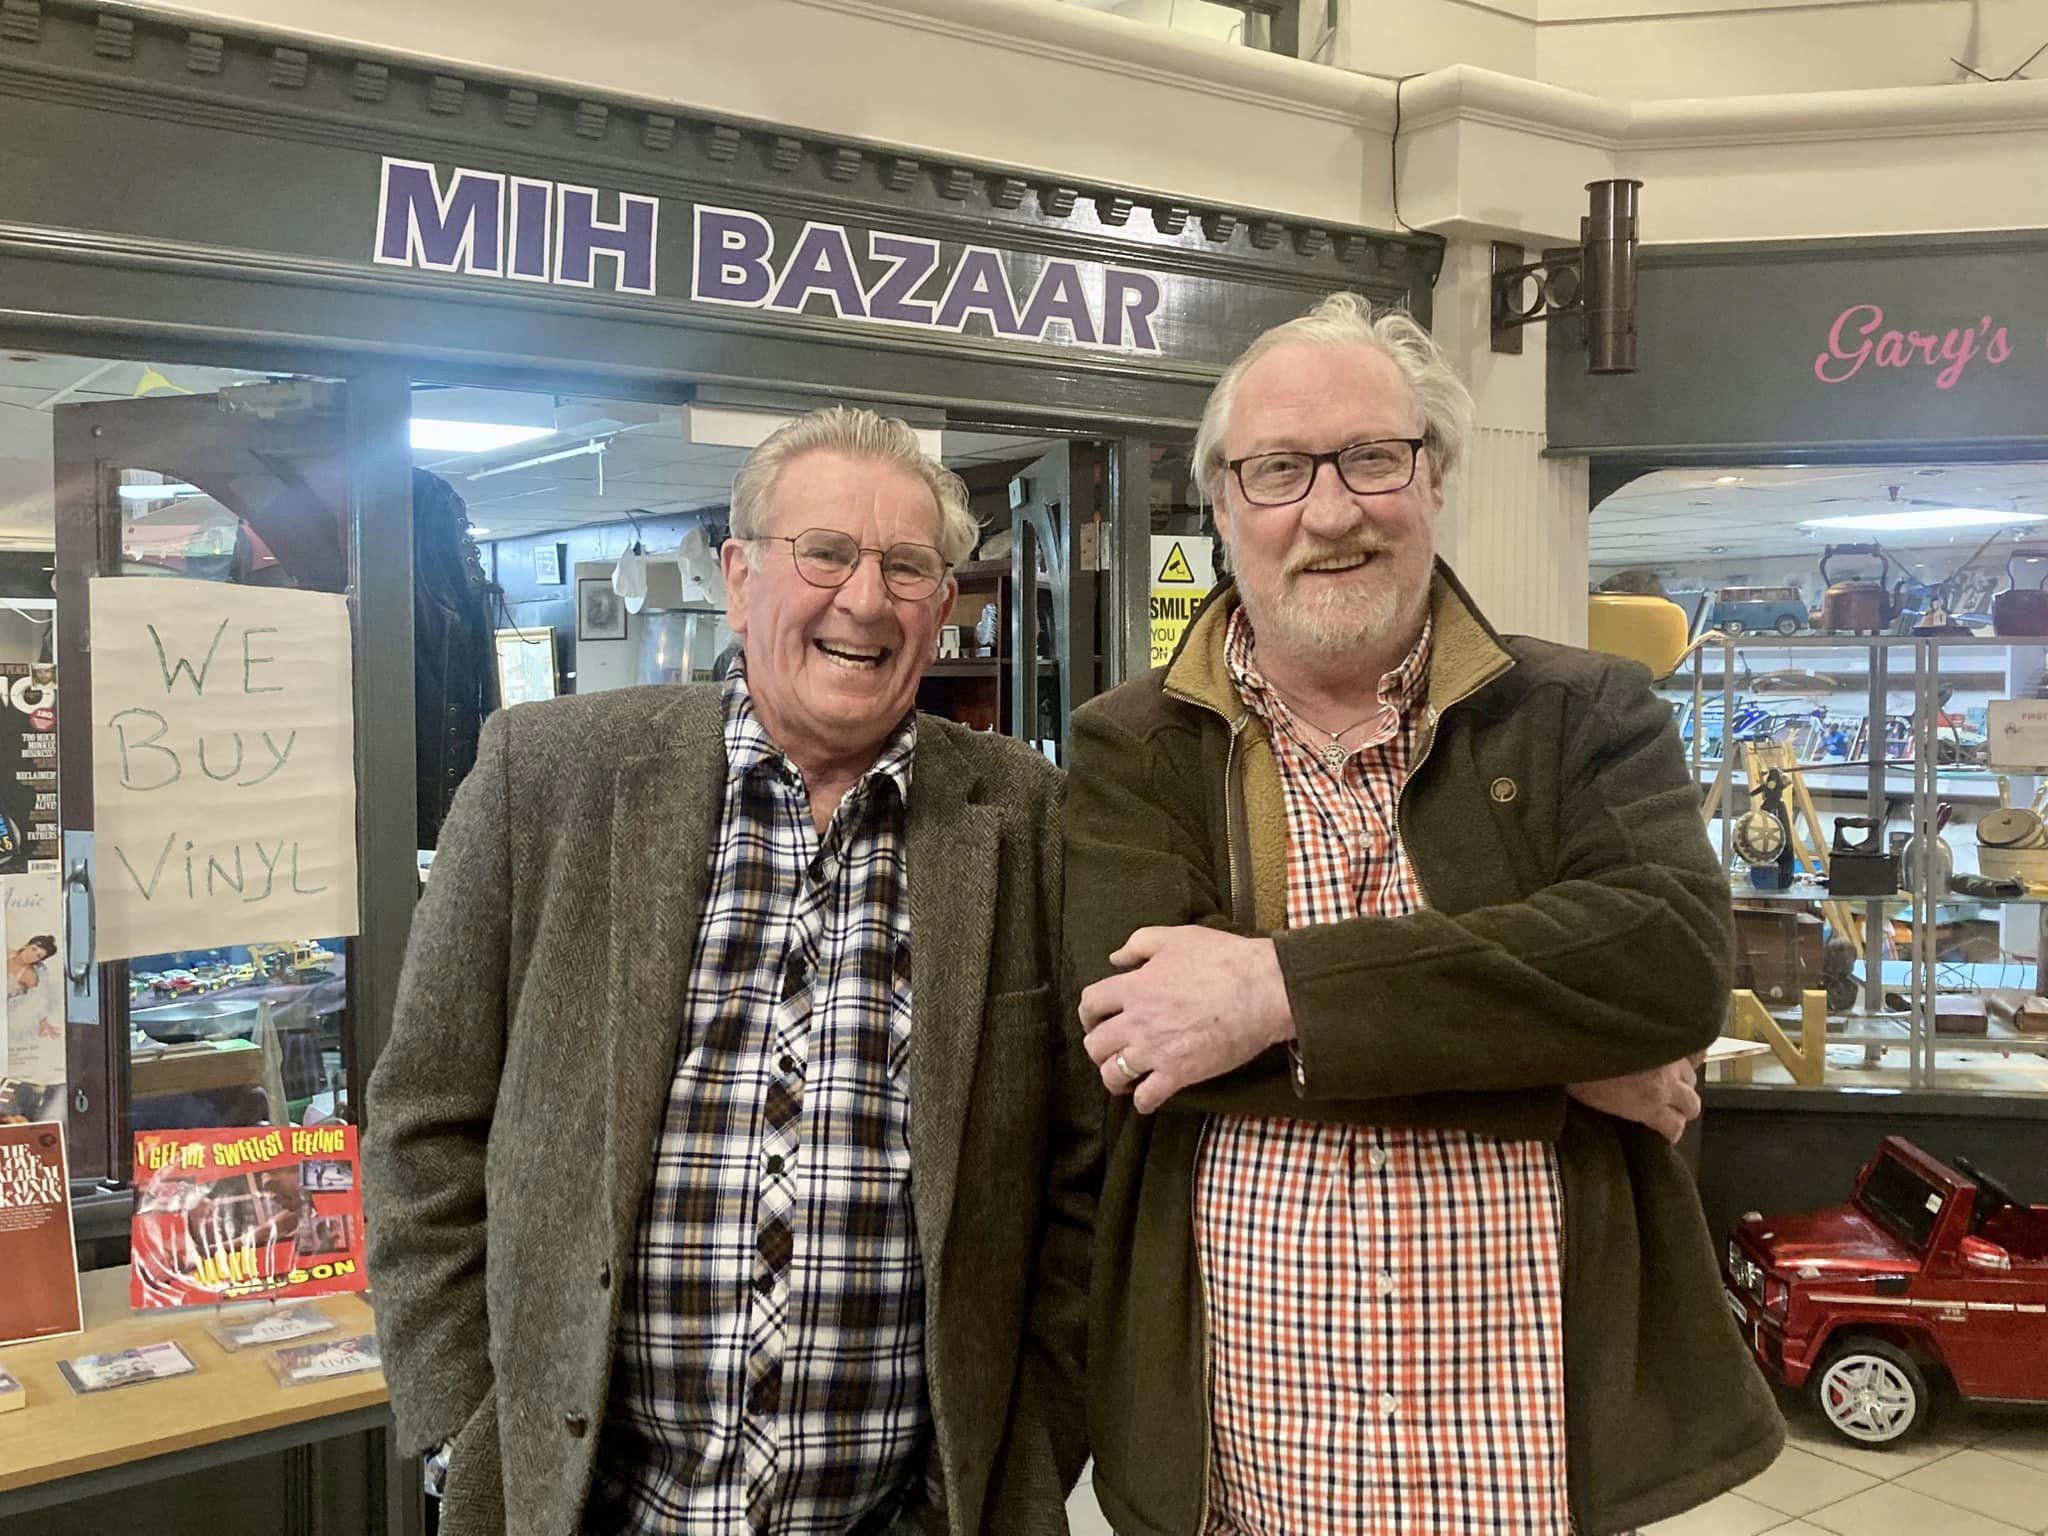 Work is taking place to repair and restore Cambridge Arcade in Southport. John Savage owner of MIH Bazaar (right). Photo by Andrew Brown Stand Up For Southport